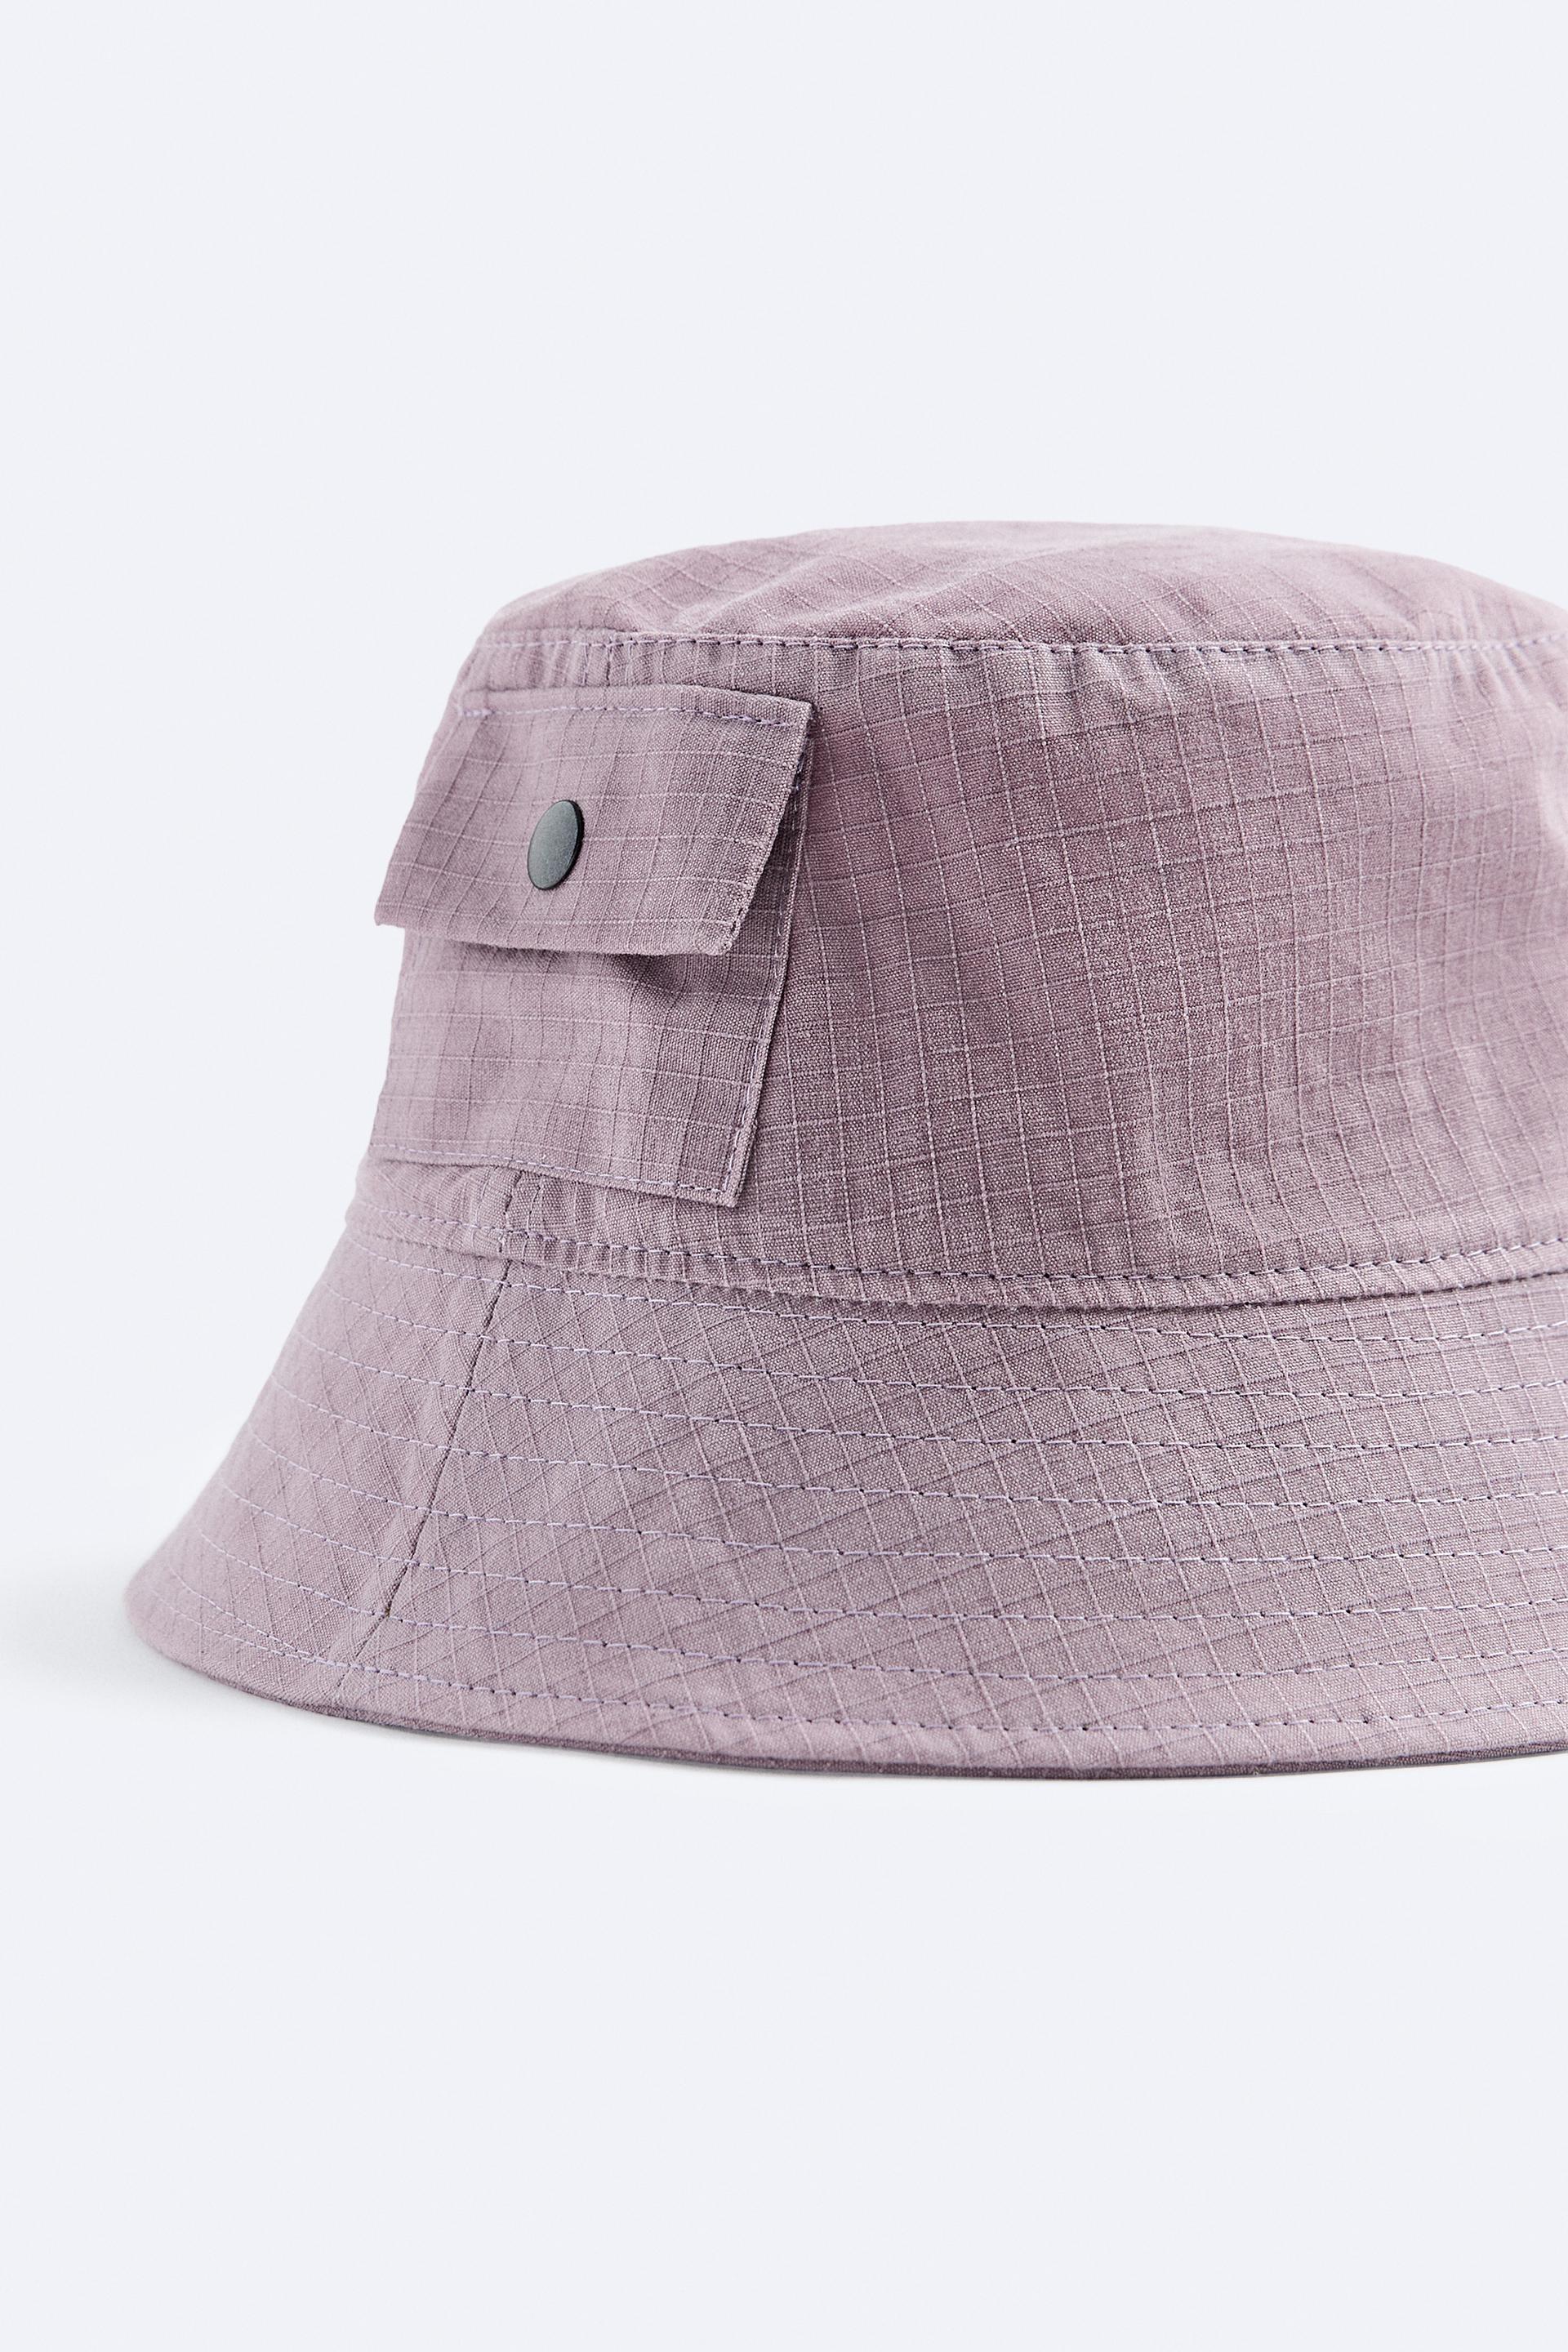 BUCKET HAT WITH POCKET - Brown / Taupe